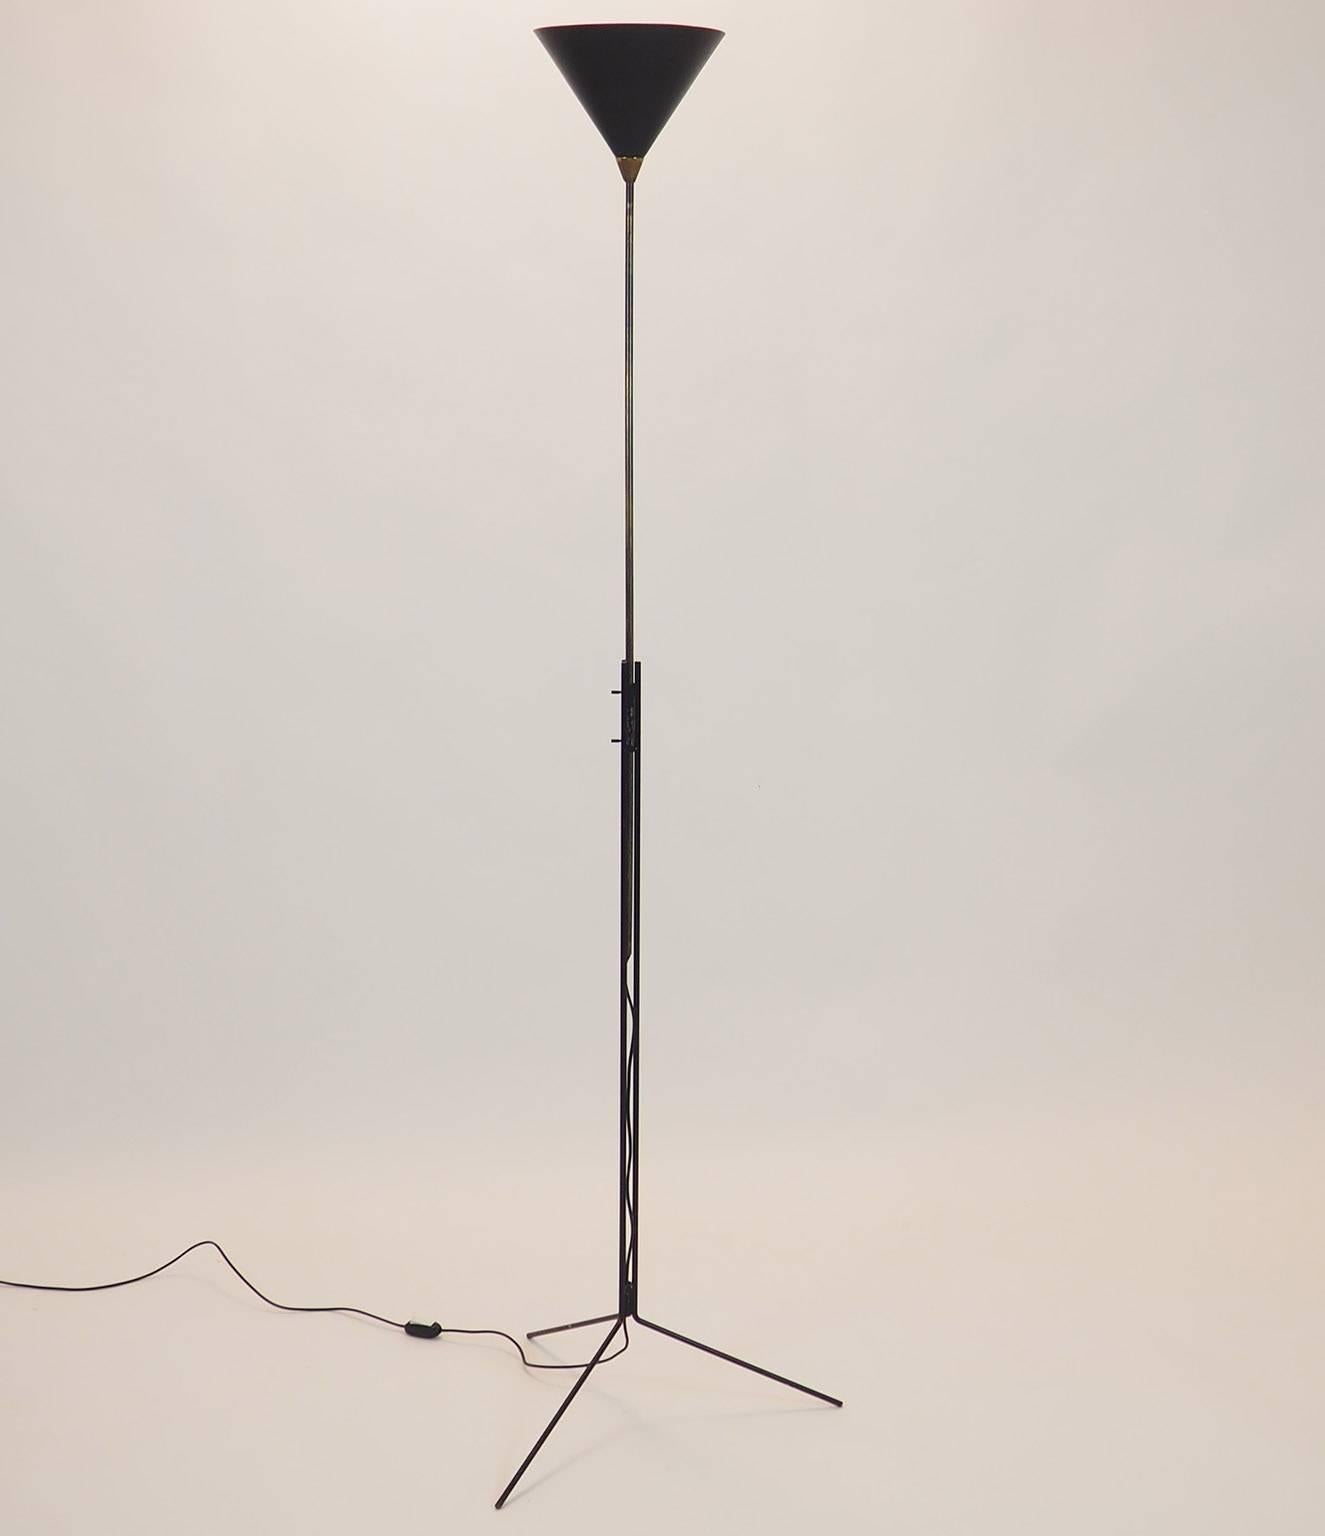 Rare and light adjustable floor lamp designed by Tito Agnoli during 1950s, with stem in natural brass sliding inside a tripartite structure in black brass.
Two brass cylinders allow fixing to the desired height of the Light cone.
The tripod basement